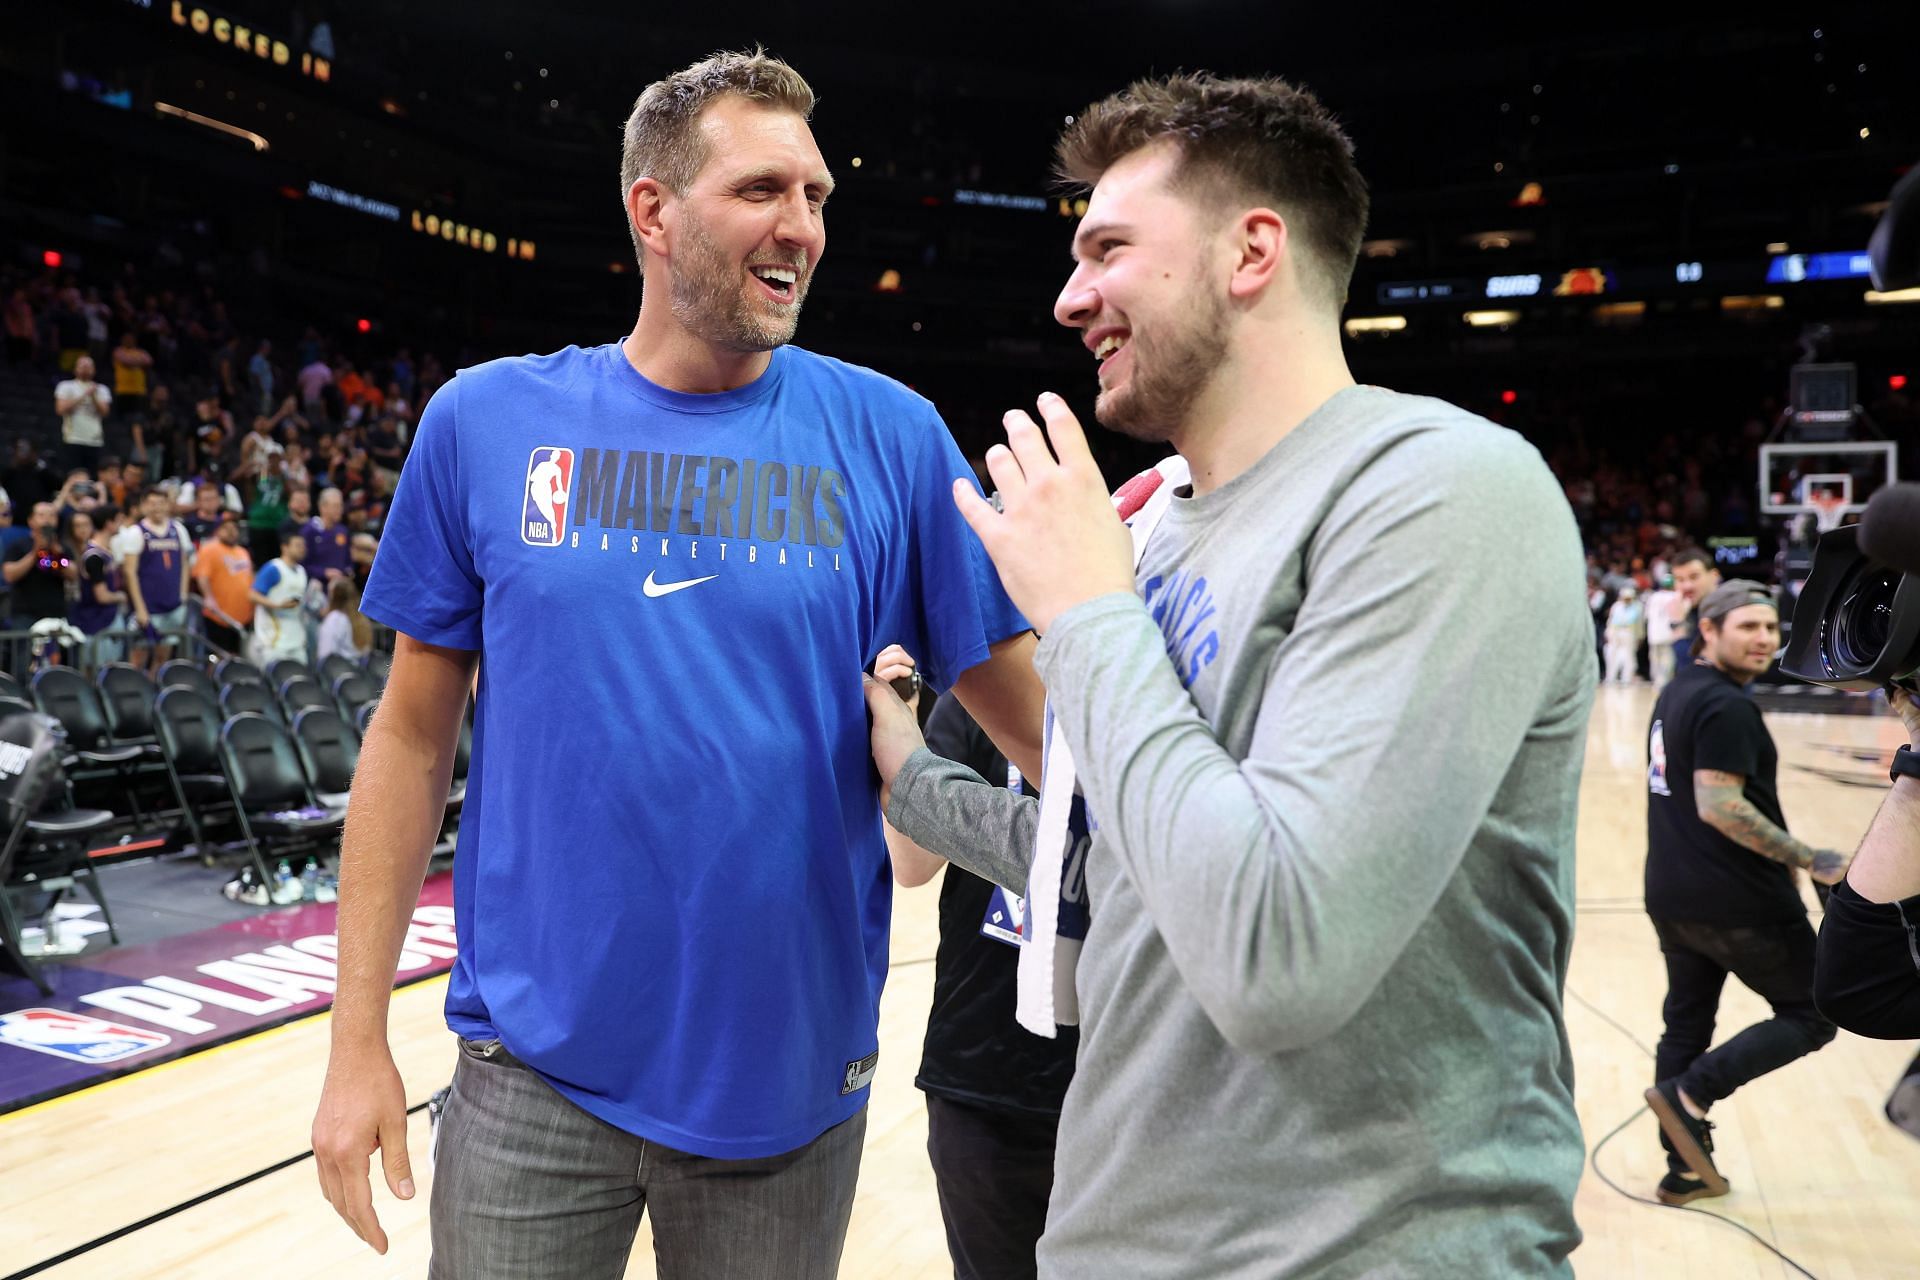 Video Luka Doncic shows off exquisite tennis form at a charity event held by Dallas Mavericks legend Dirk Nowitzki